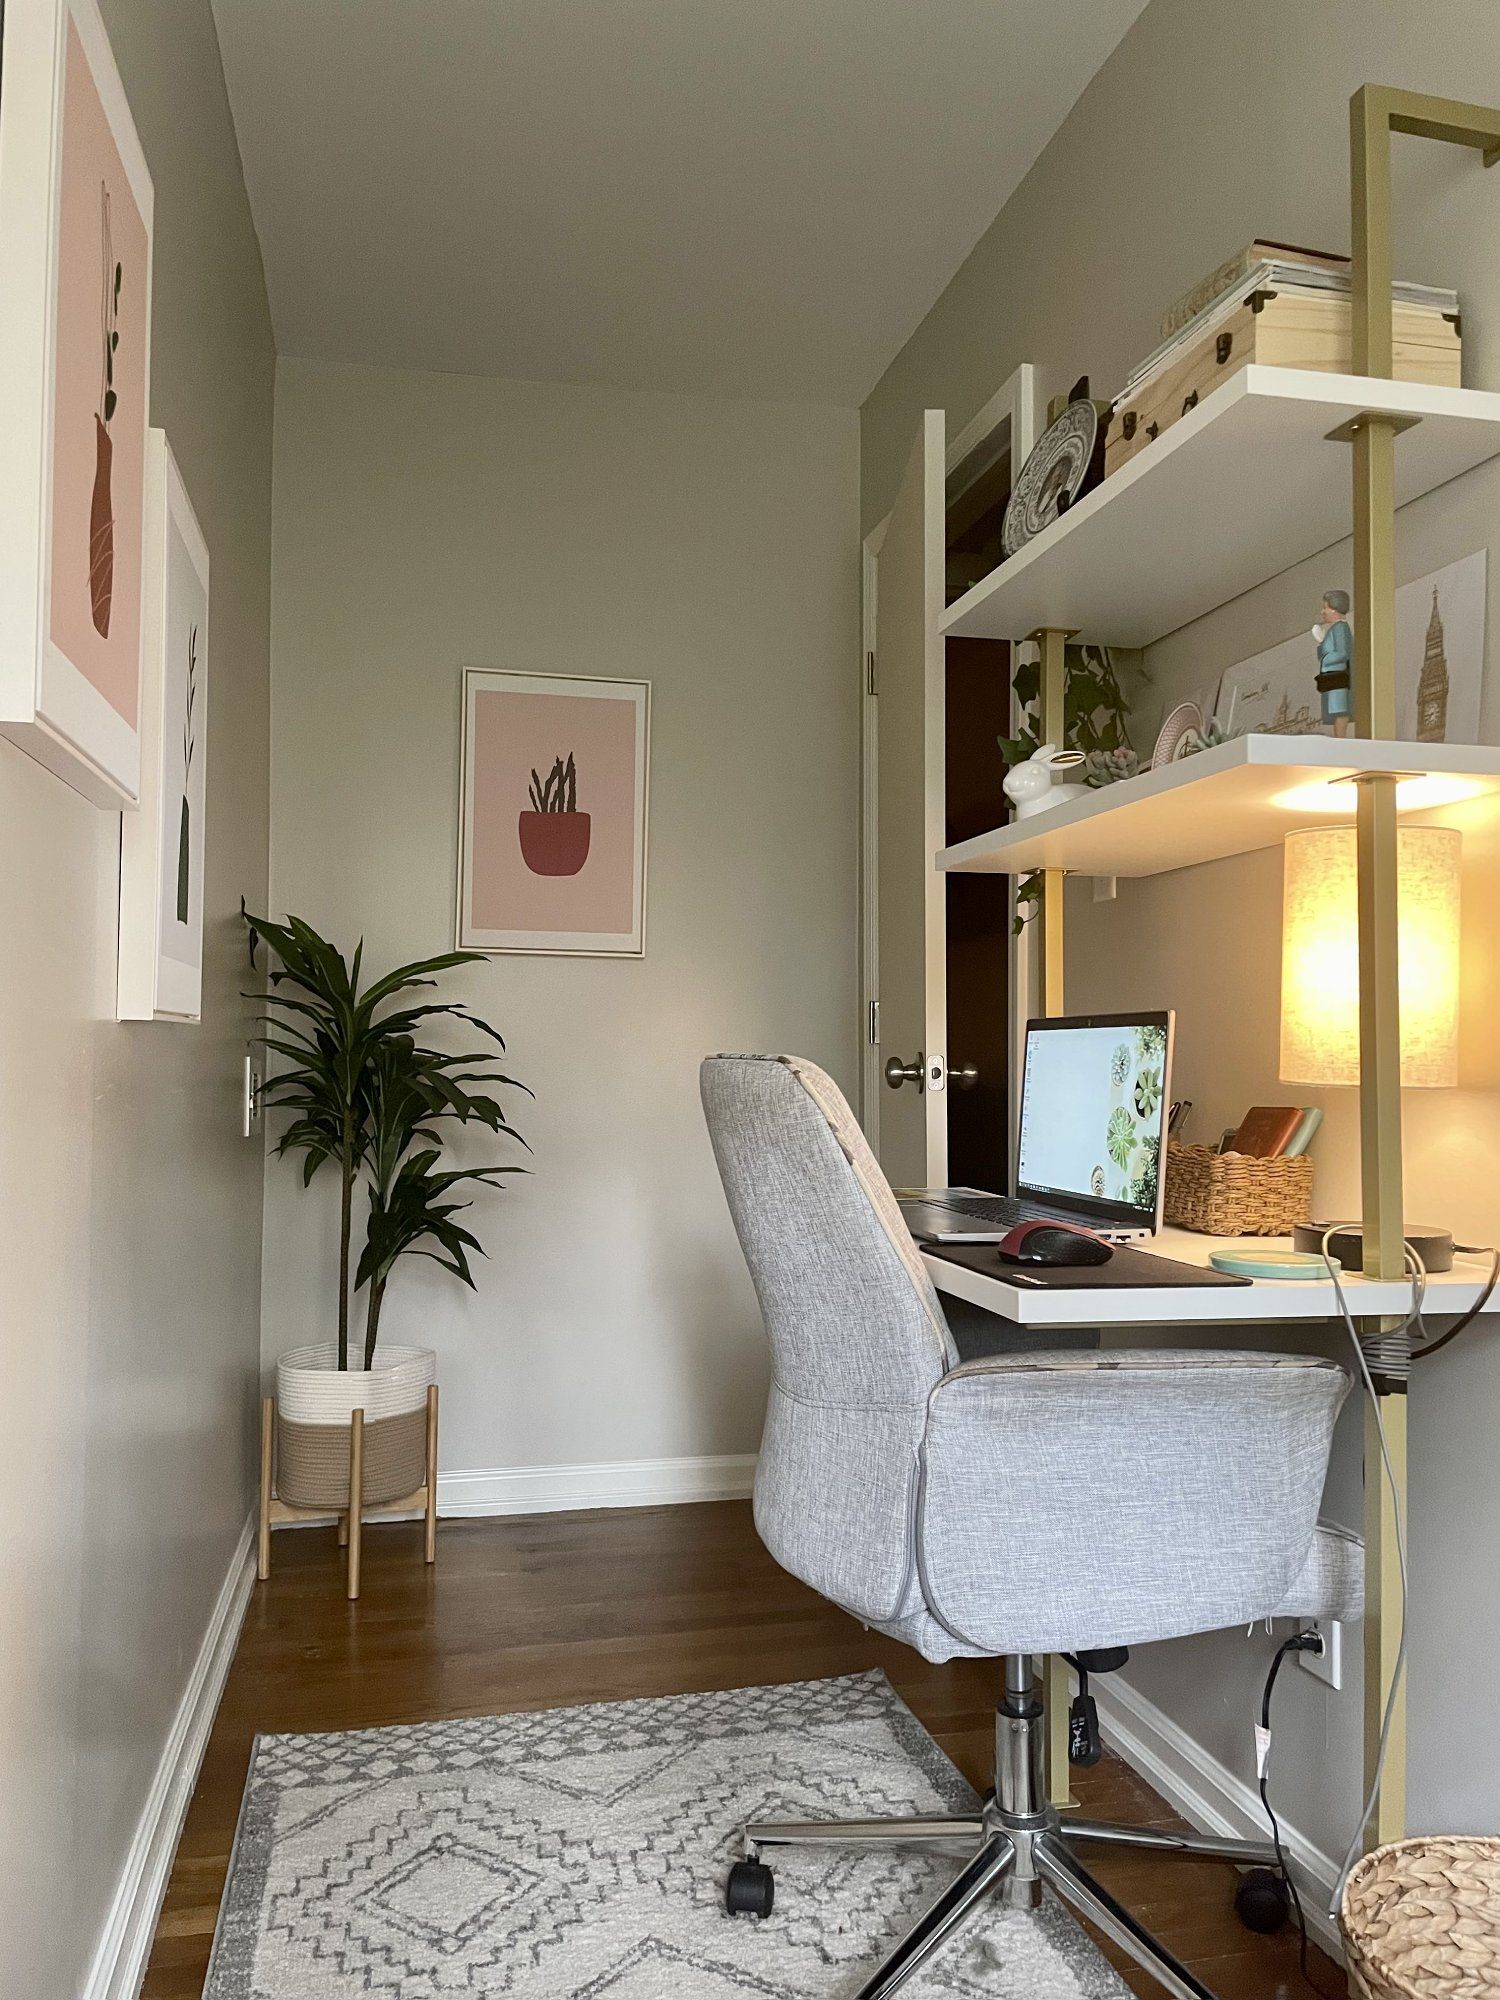 A small yet functional workspace in a former closet room